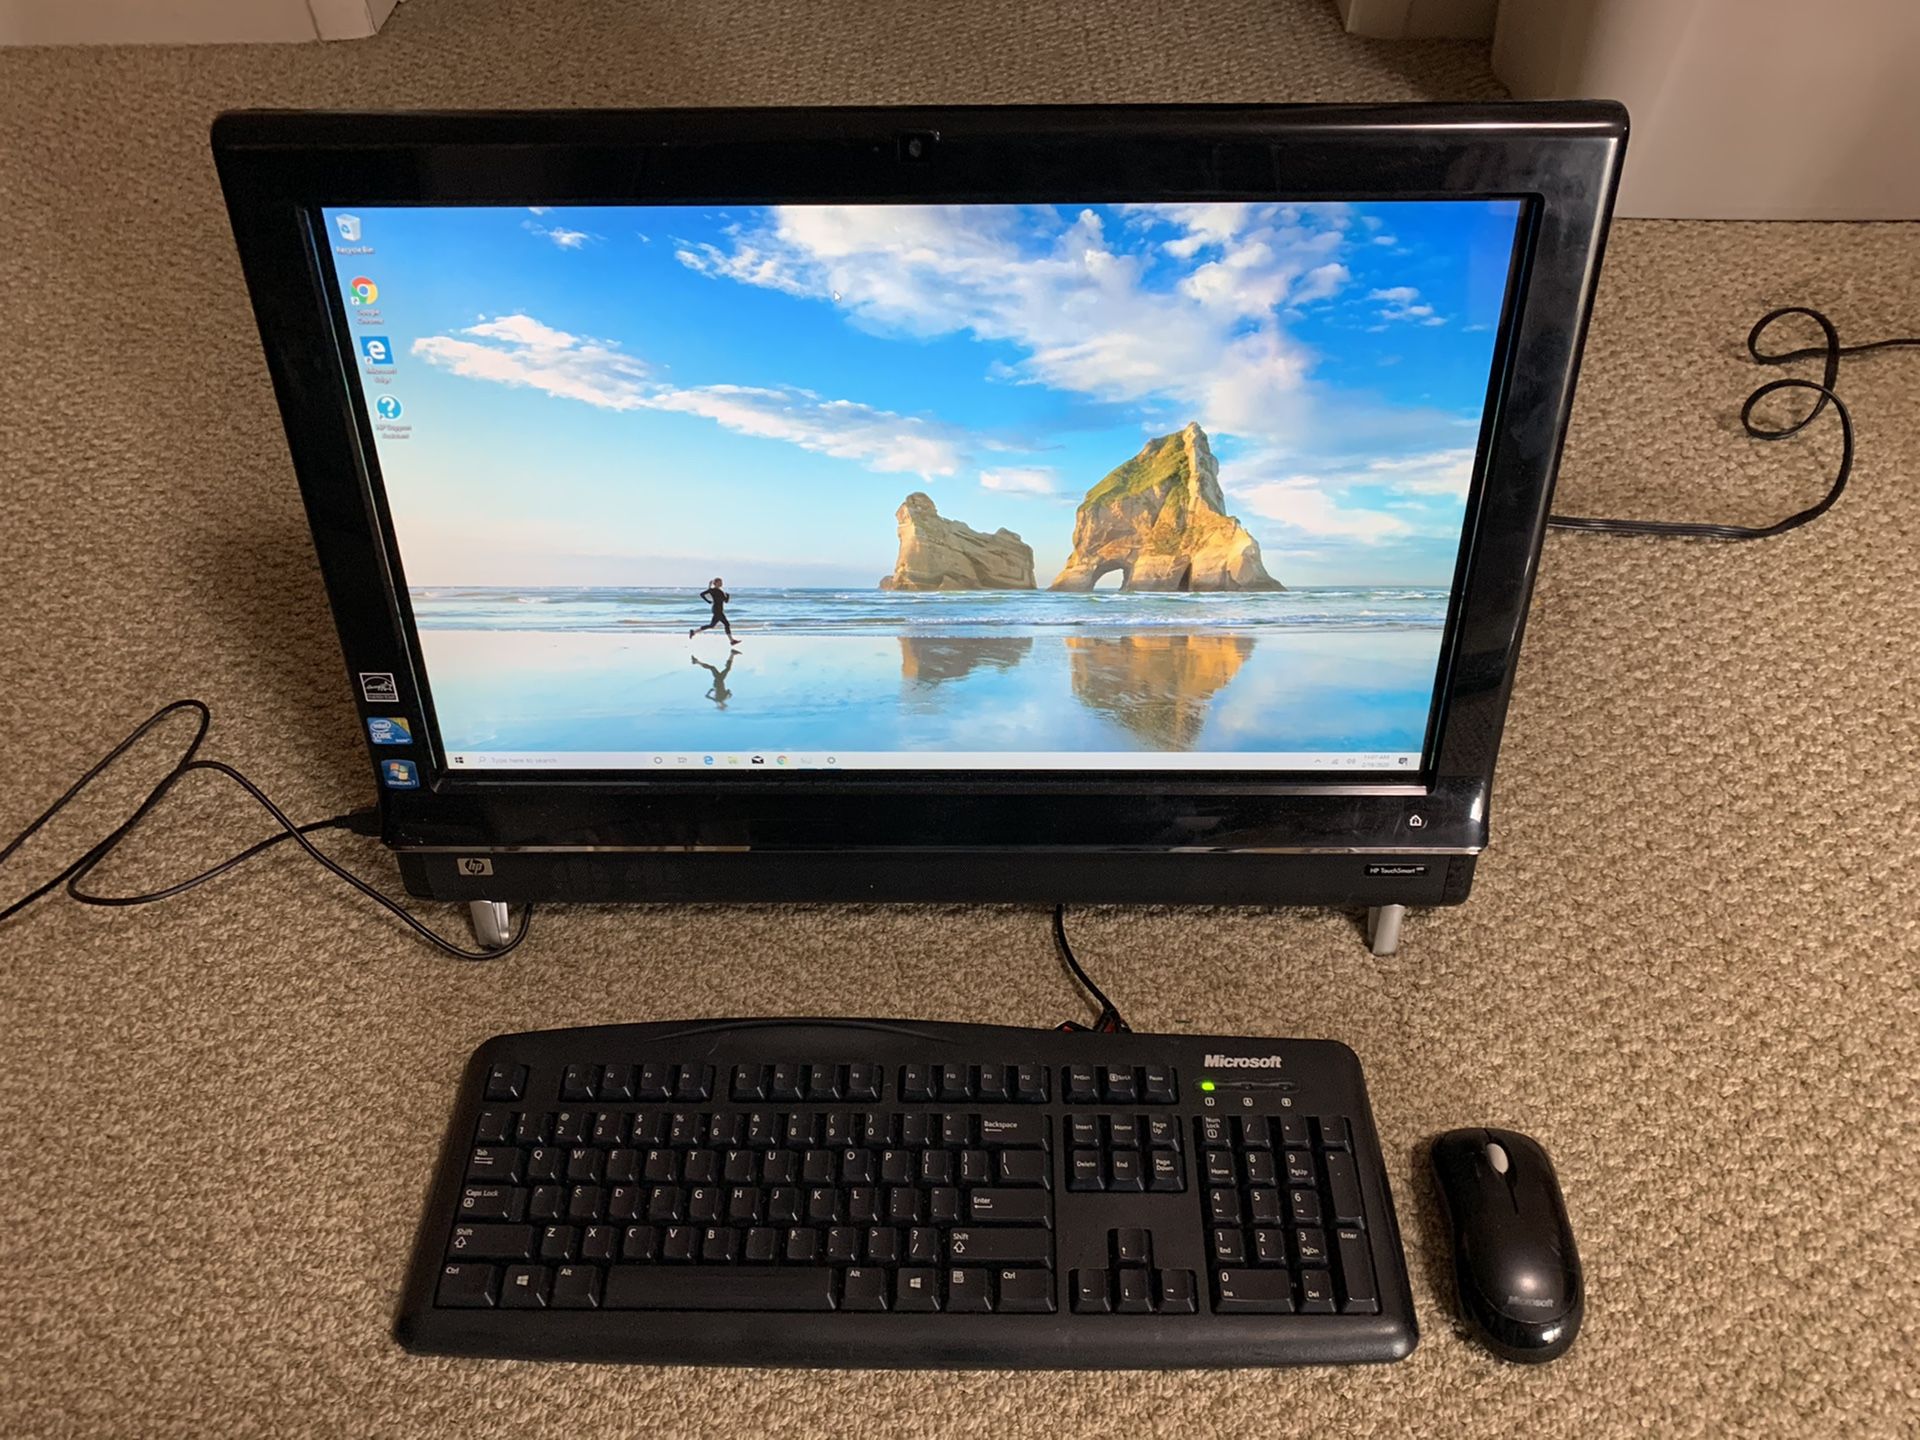 HP Pavilion 23” touchscreen all in one